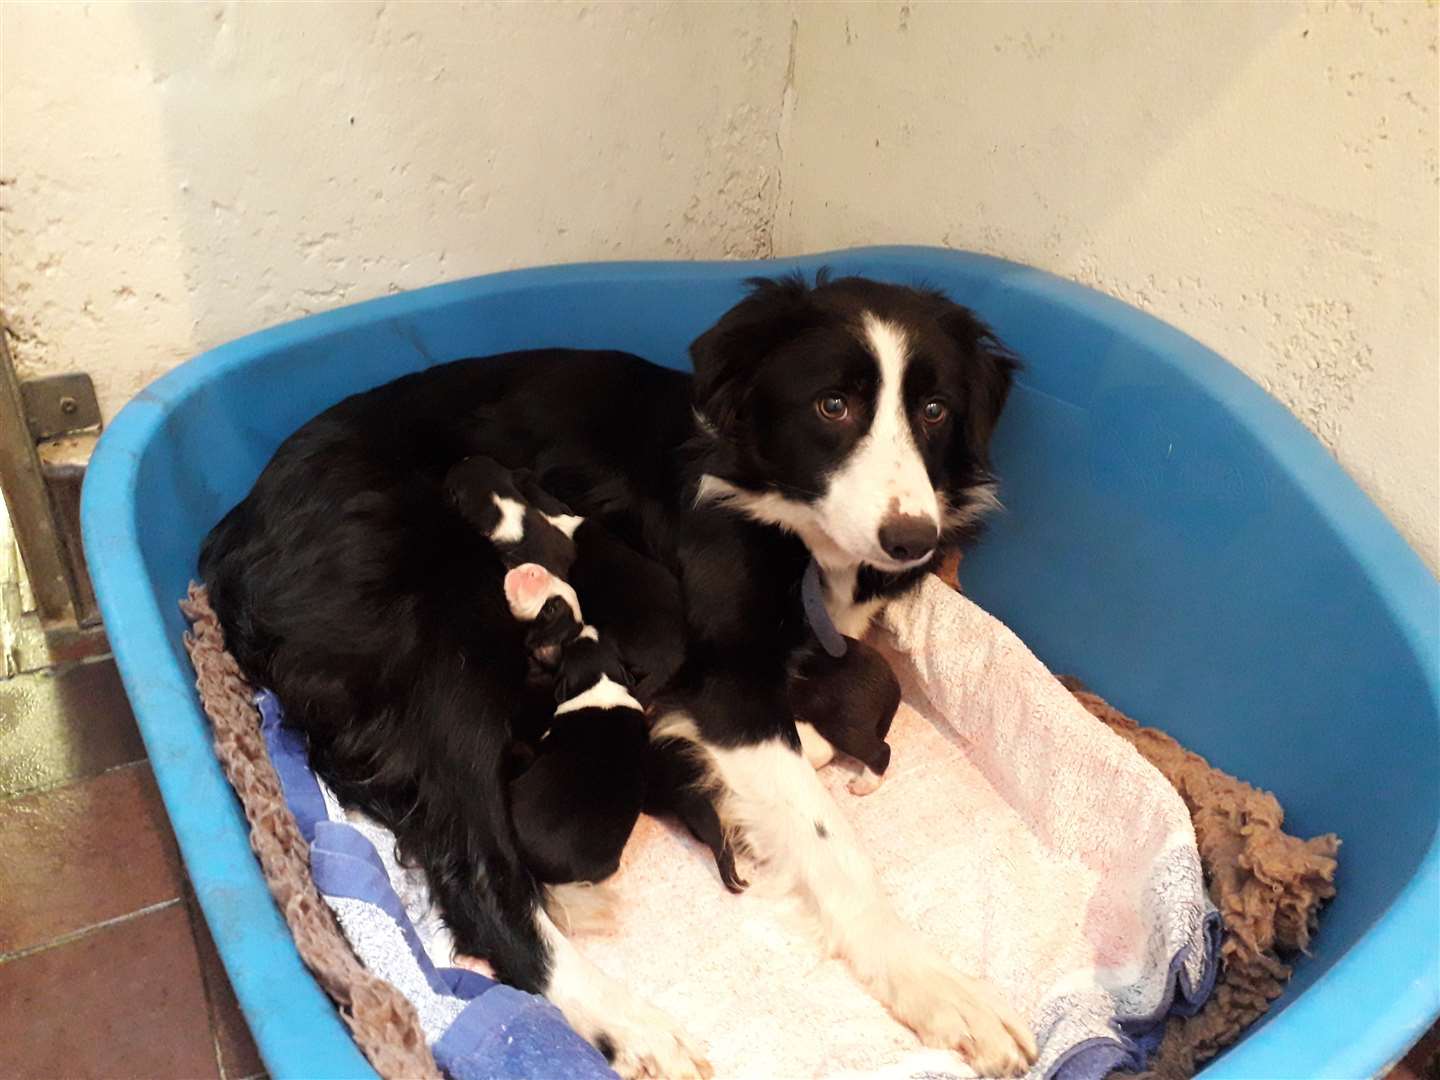 Ash with her puppies after being rescued.